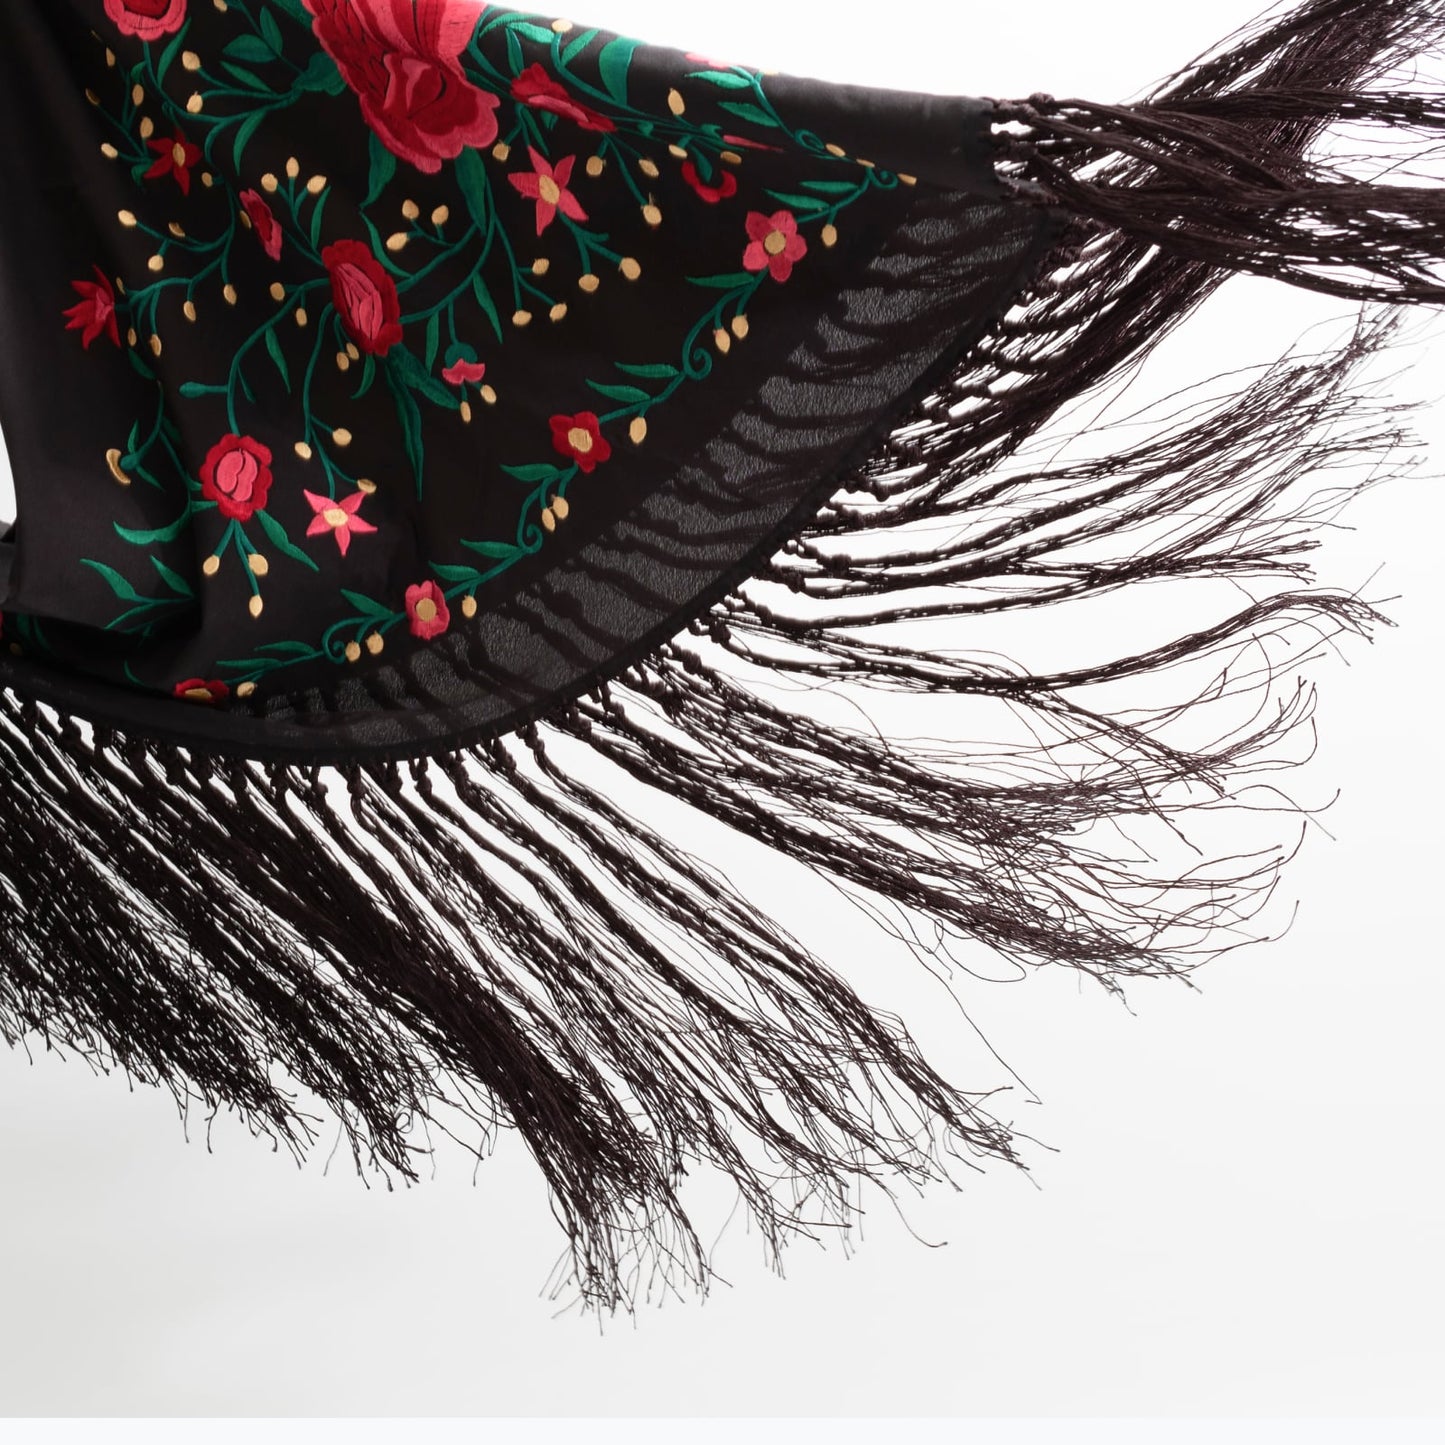 Black and red floral embroidered mantoncillo shawl in crespon.